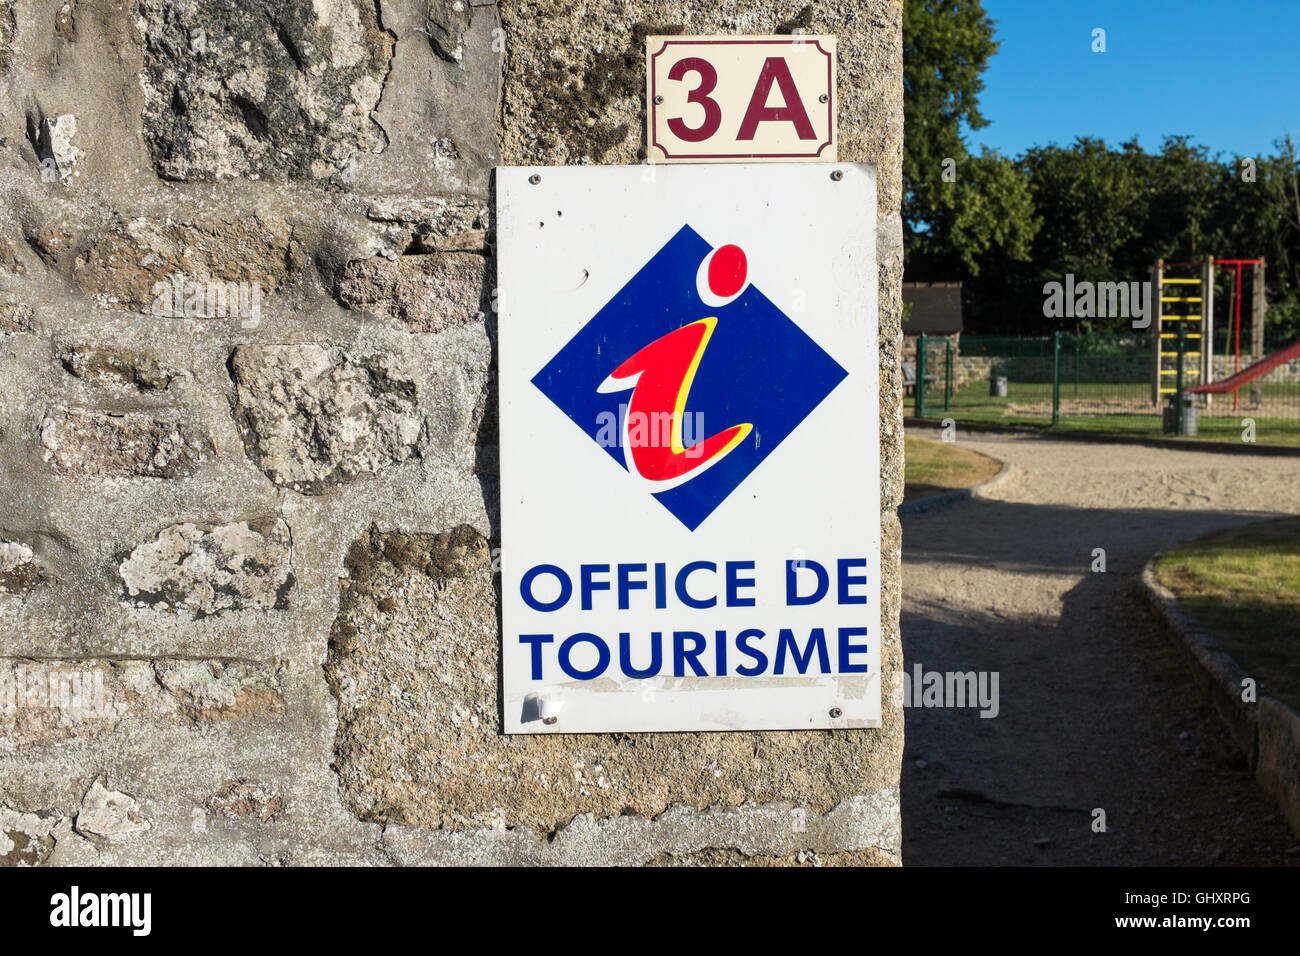 Sign on wall for Office de Tourisme in France Stock Photo